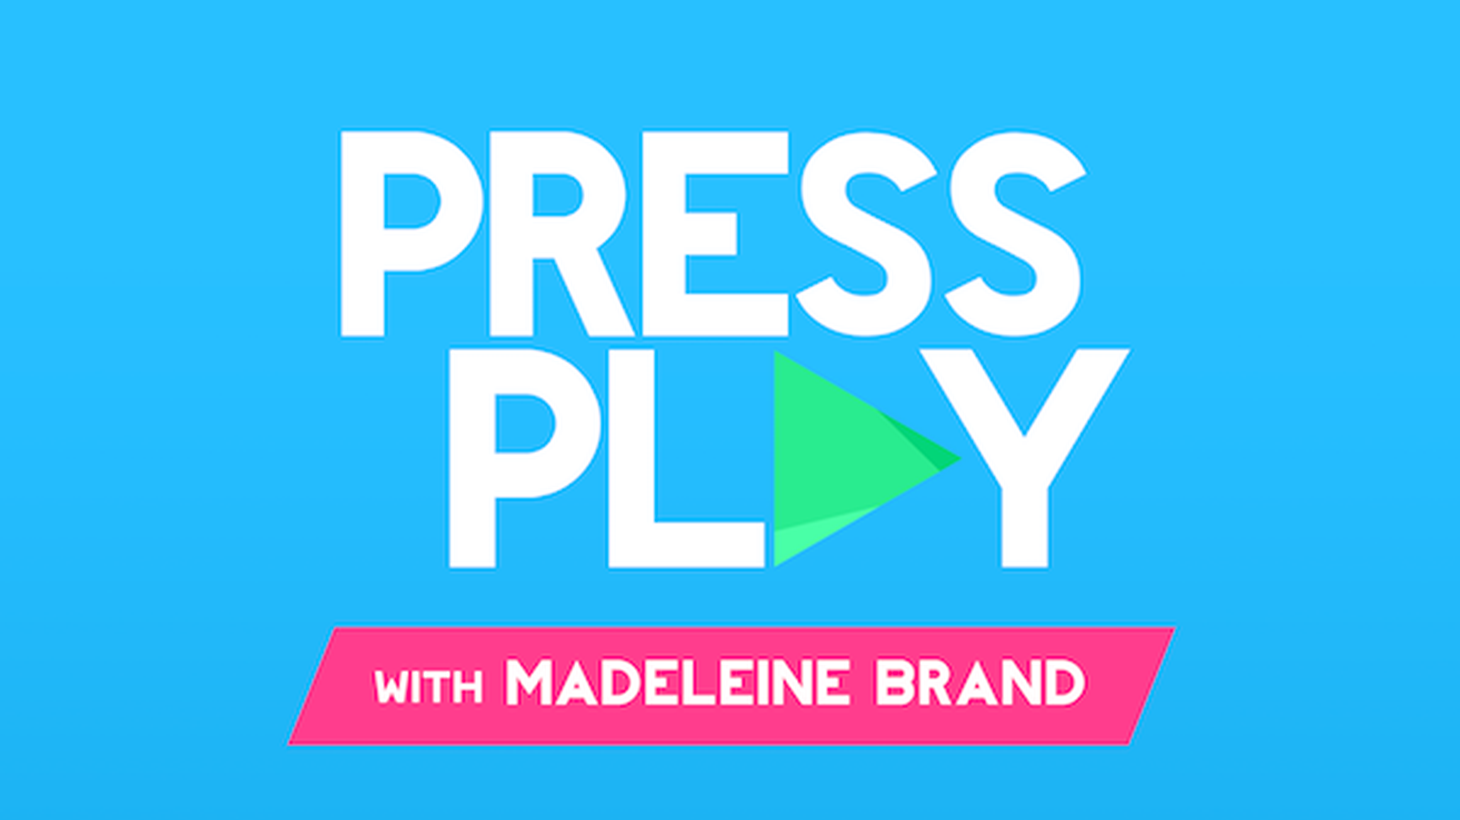 For a special holiday show, Press Play brings you a conversation about the best TV shows of all time, Maria Semple’s book “Today Will Be Different,” the 40th anniversary of the Ramones’ debut, and the trend of eating Chinese food on Christmas.